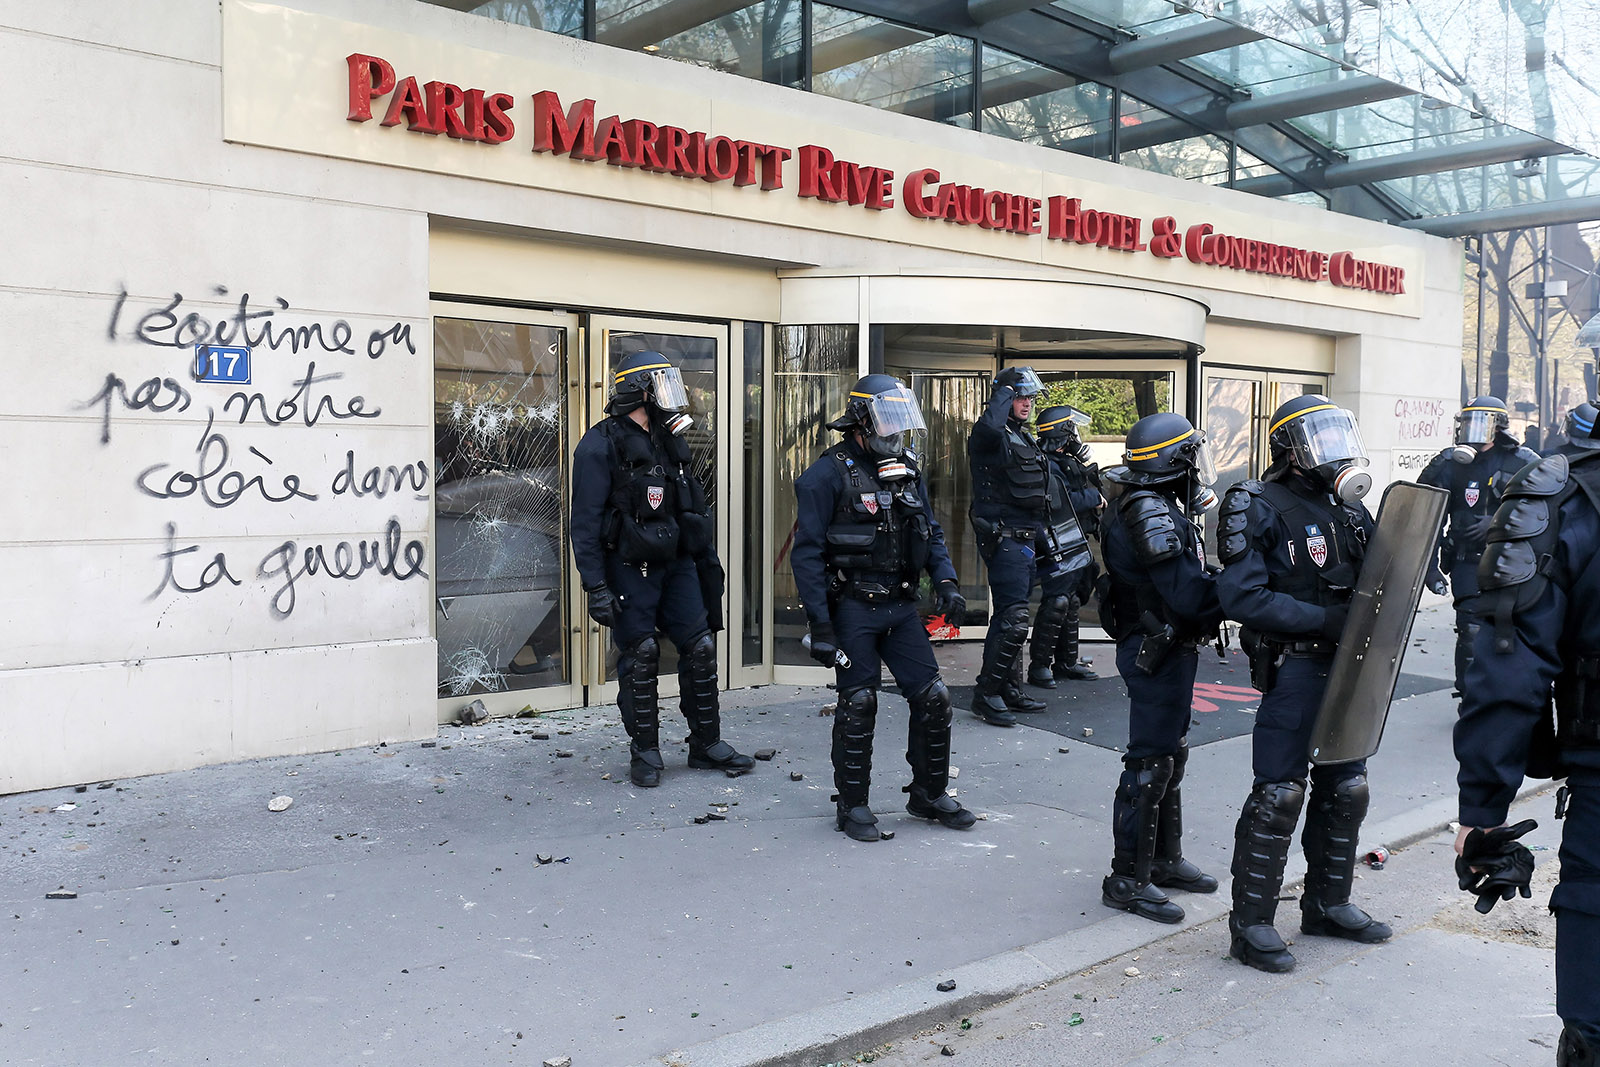 Graffiti reading “legitimate or not, our rage in your face,” as French President Emmanuel Macron prepared to leave for his state visit to the US and riot police in Paris faced violent protests coinciding with a rail strike and student sit-ins, April 19, 2018